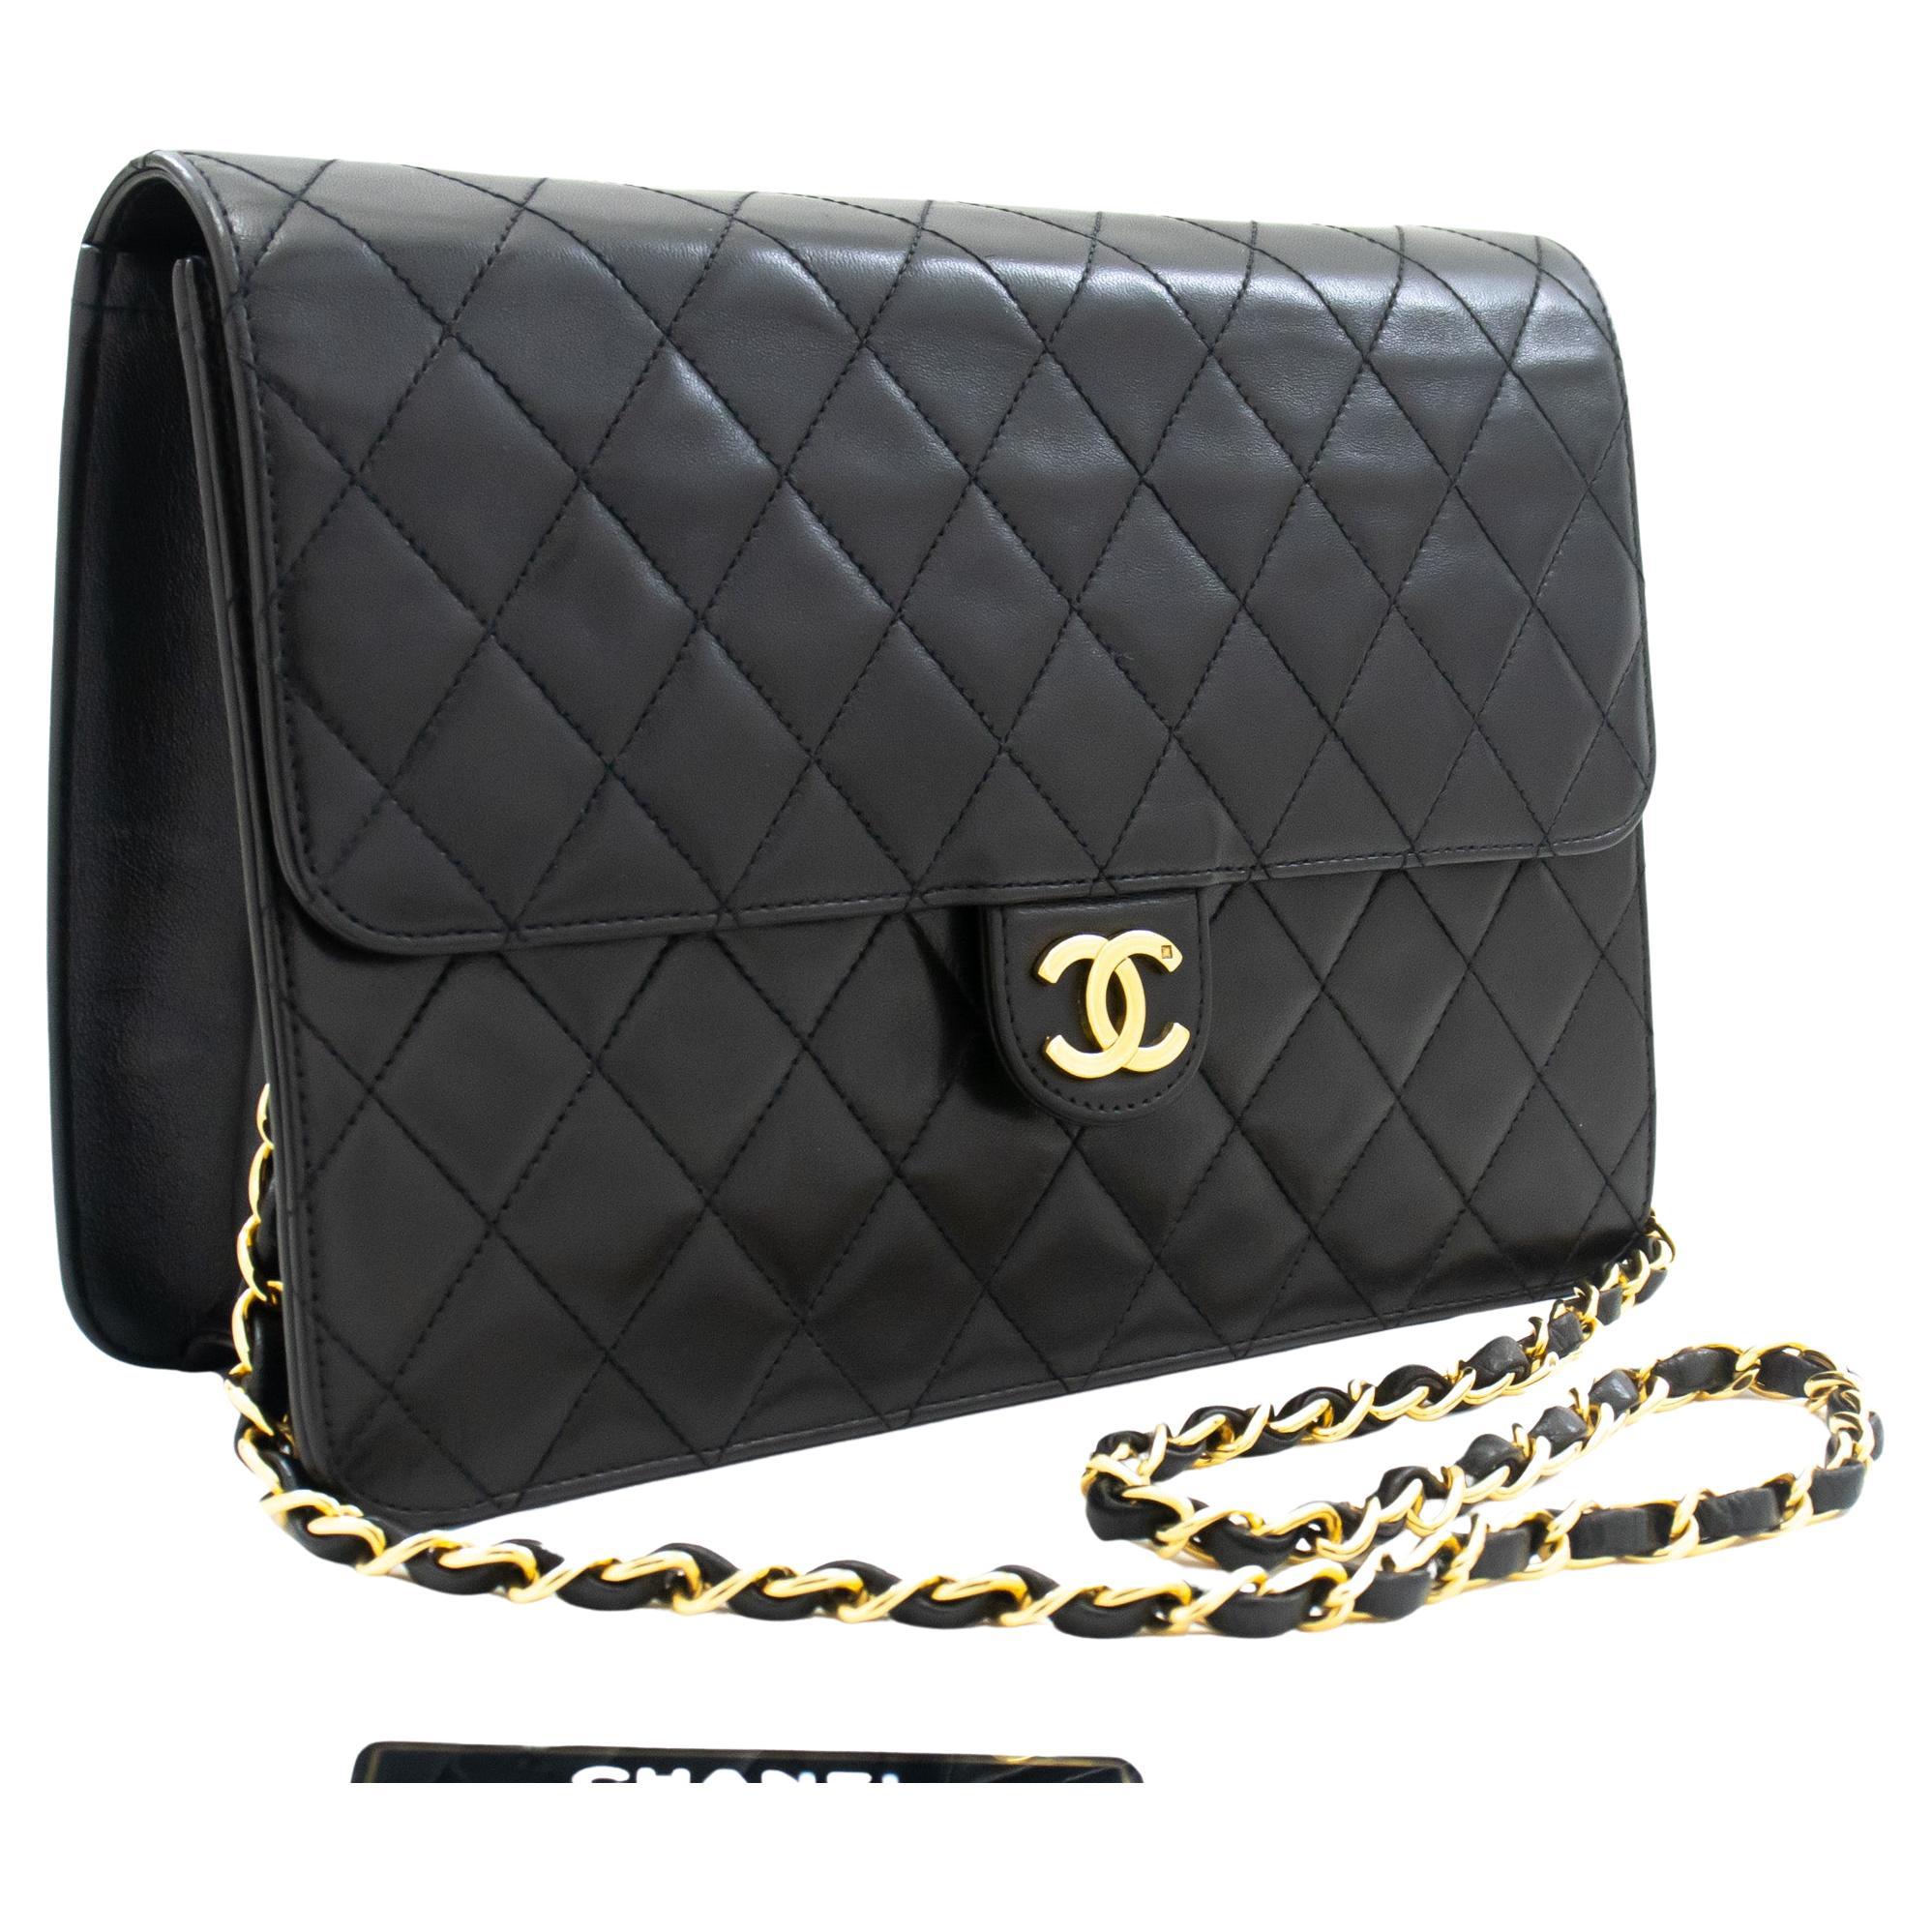 CHANEL Black Quilted Lambskin Vintage Medium Classic Single Flap